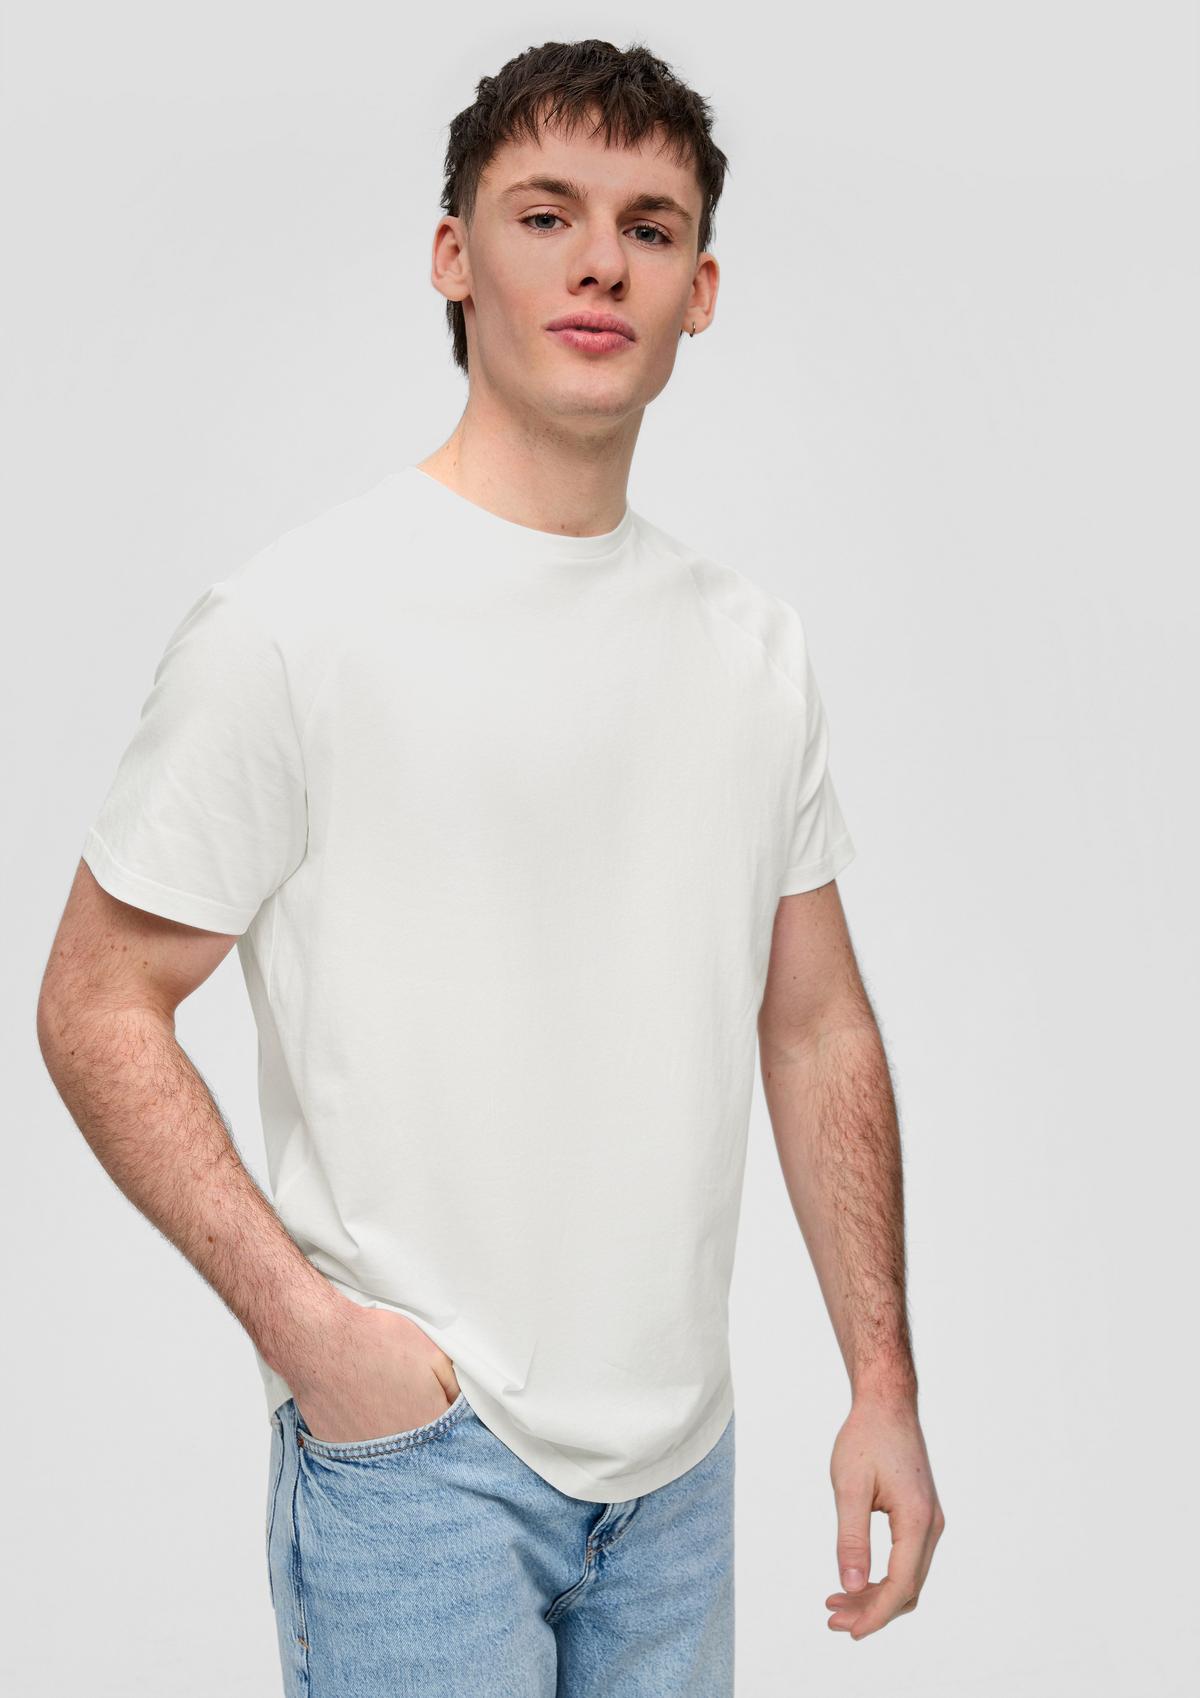 Classic T-shirt made of pure cotton